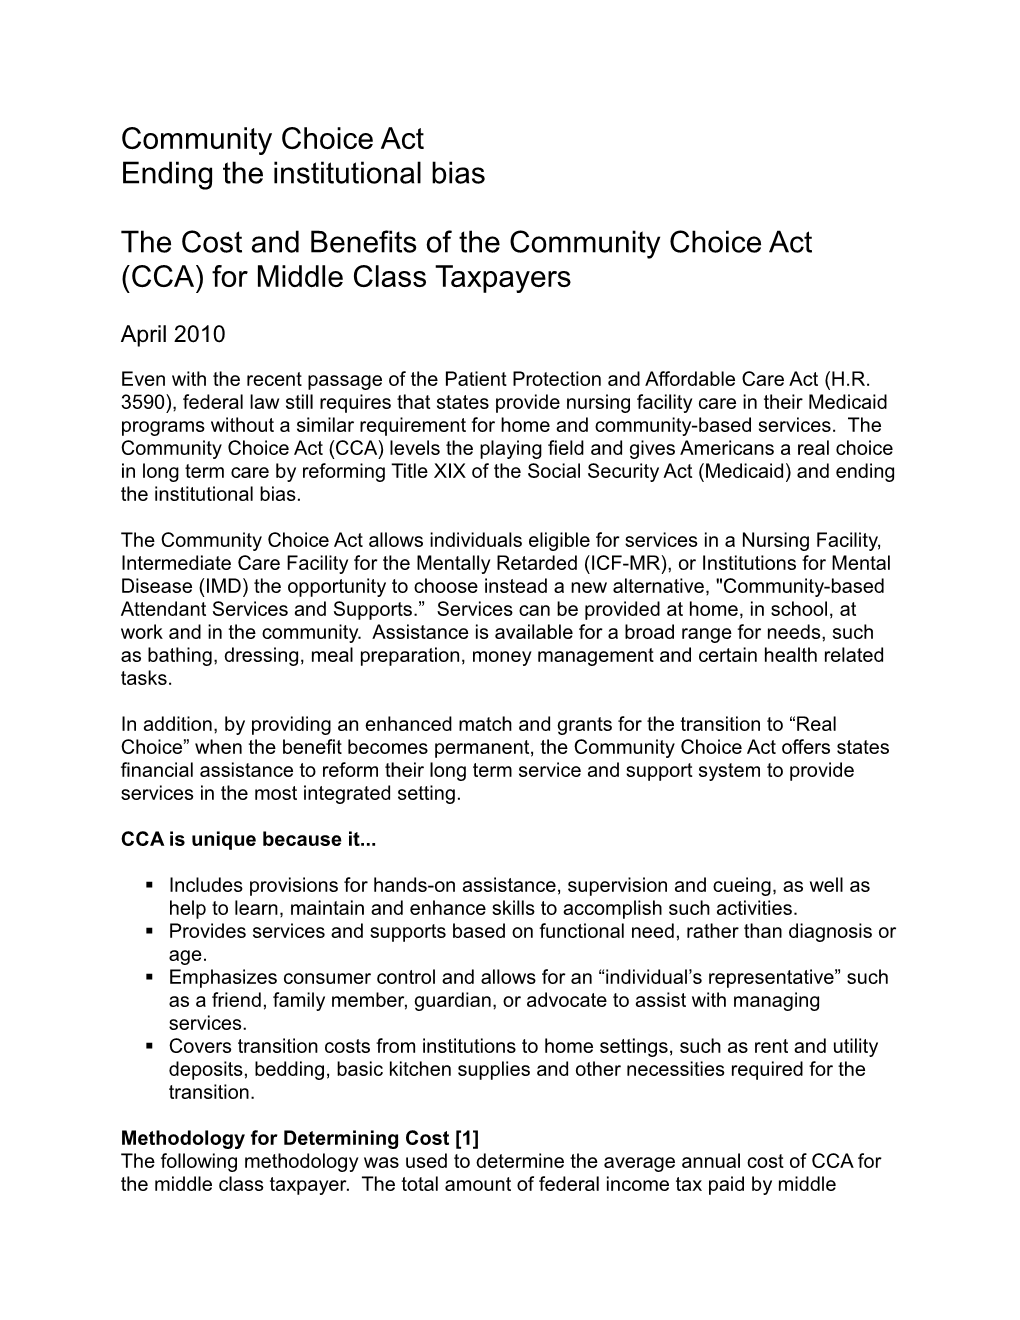 The Cost and Benefits of the Community Choice Act (CCA) for Middle Class Taxpayers